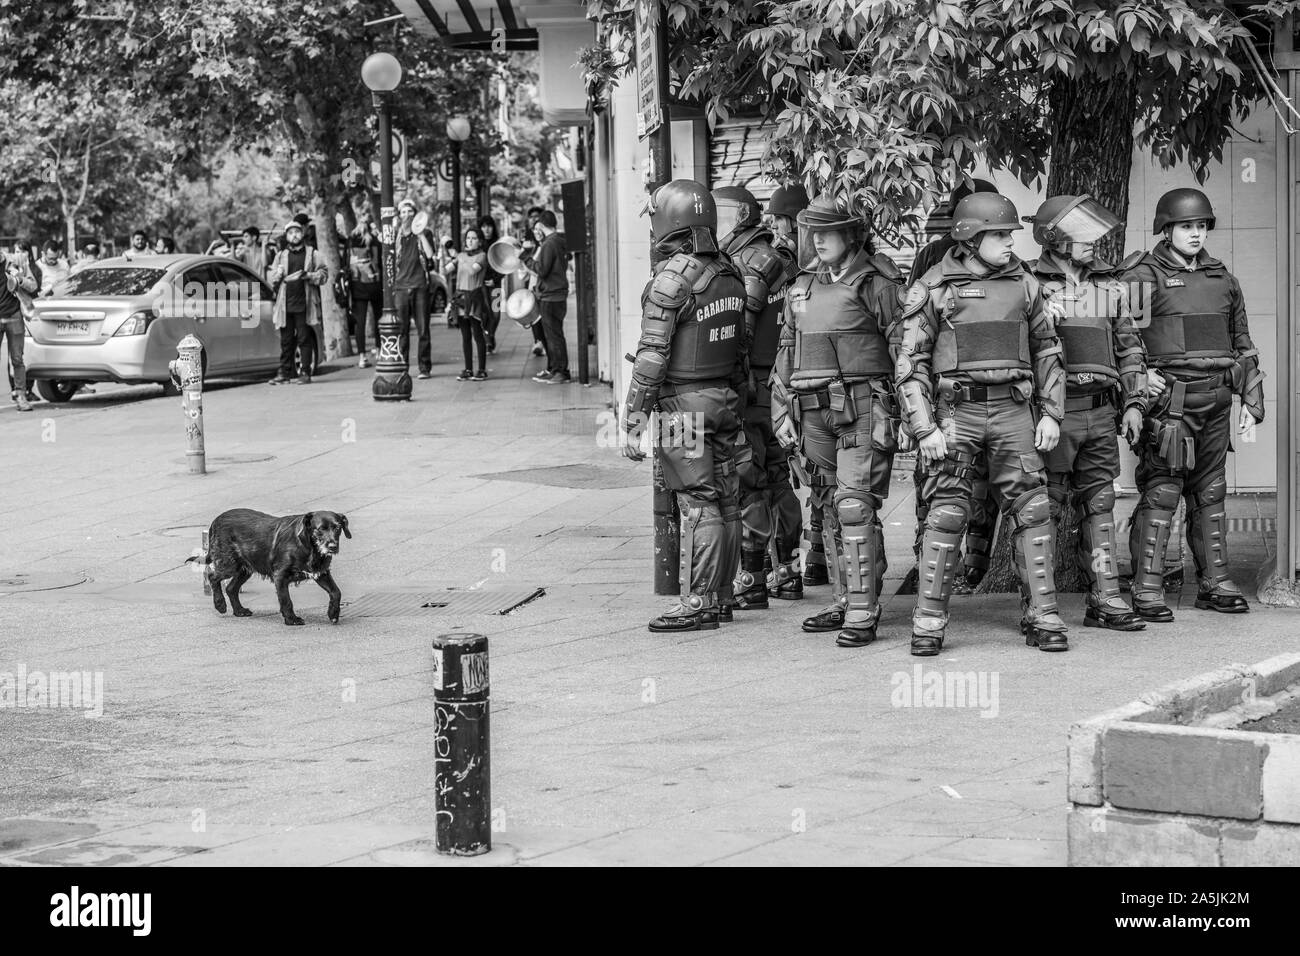 An indifferent dog passing through the clashes between the police and protesters at Santiago streets during the latest riots at Santiago de Chile city Stock Photo